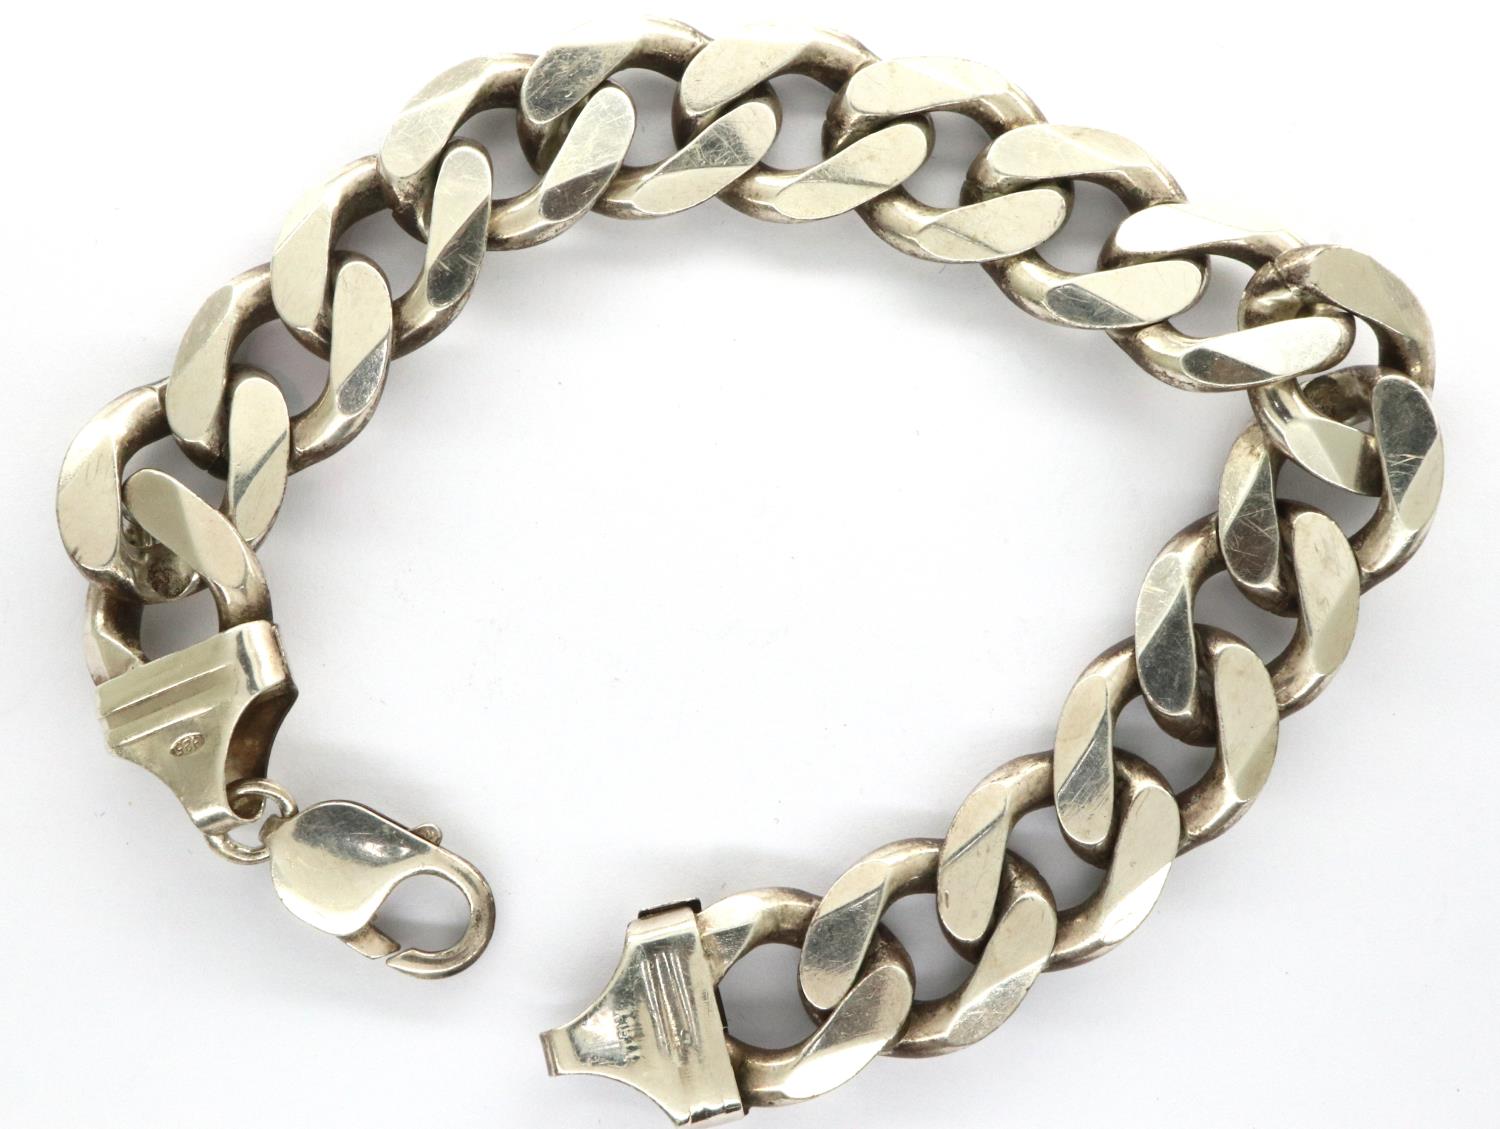 925 silver bracelet, L: 23 cm, 73g. P&P Group 1 (£14+VAT for the first lot and £1+VAT for subsequent